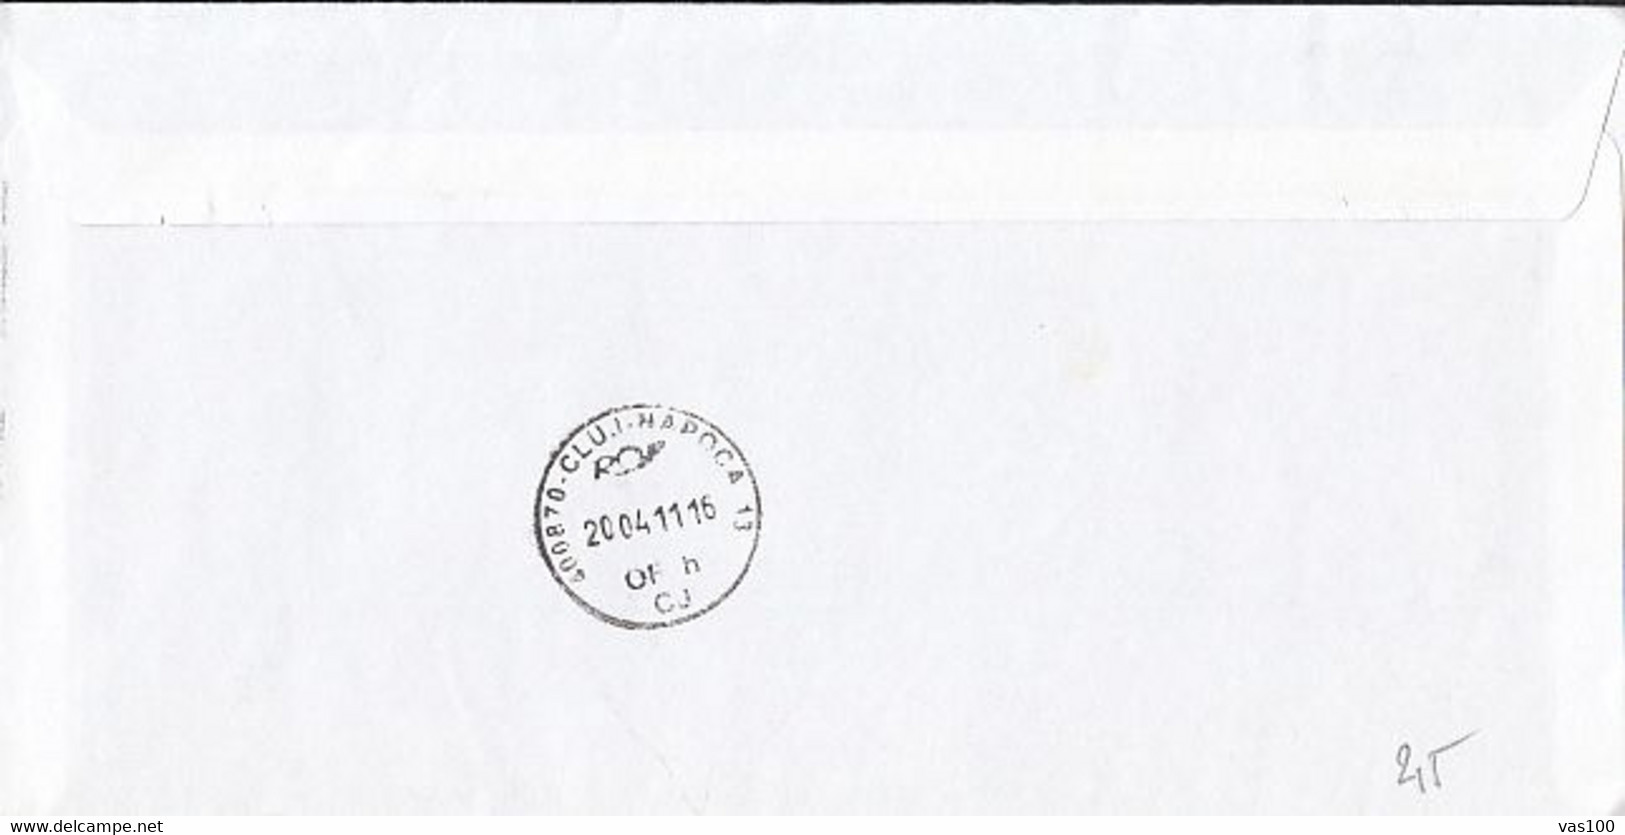 AMOUNT 2.4, CLUJ NAPOCA, COMPANY HEADER, RED MACHINE STAMPS ON COVER, 2011, ROMANIA - Covers & Documents